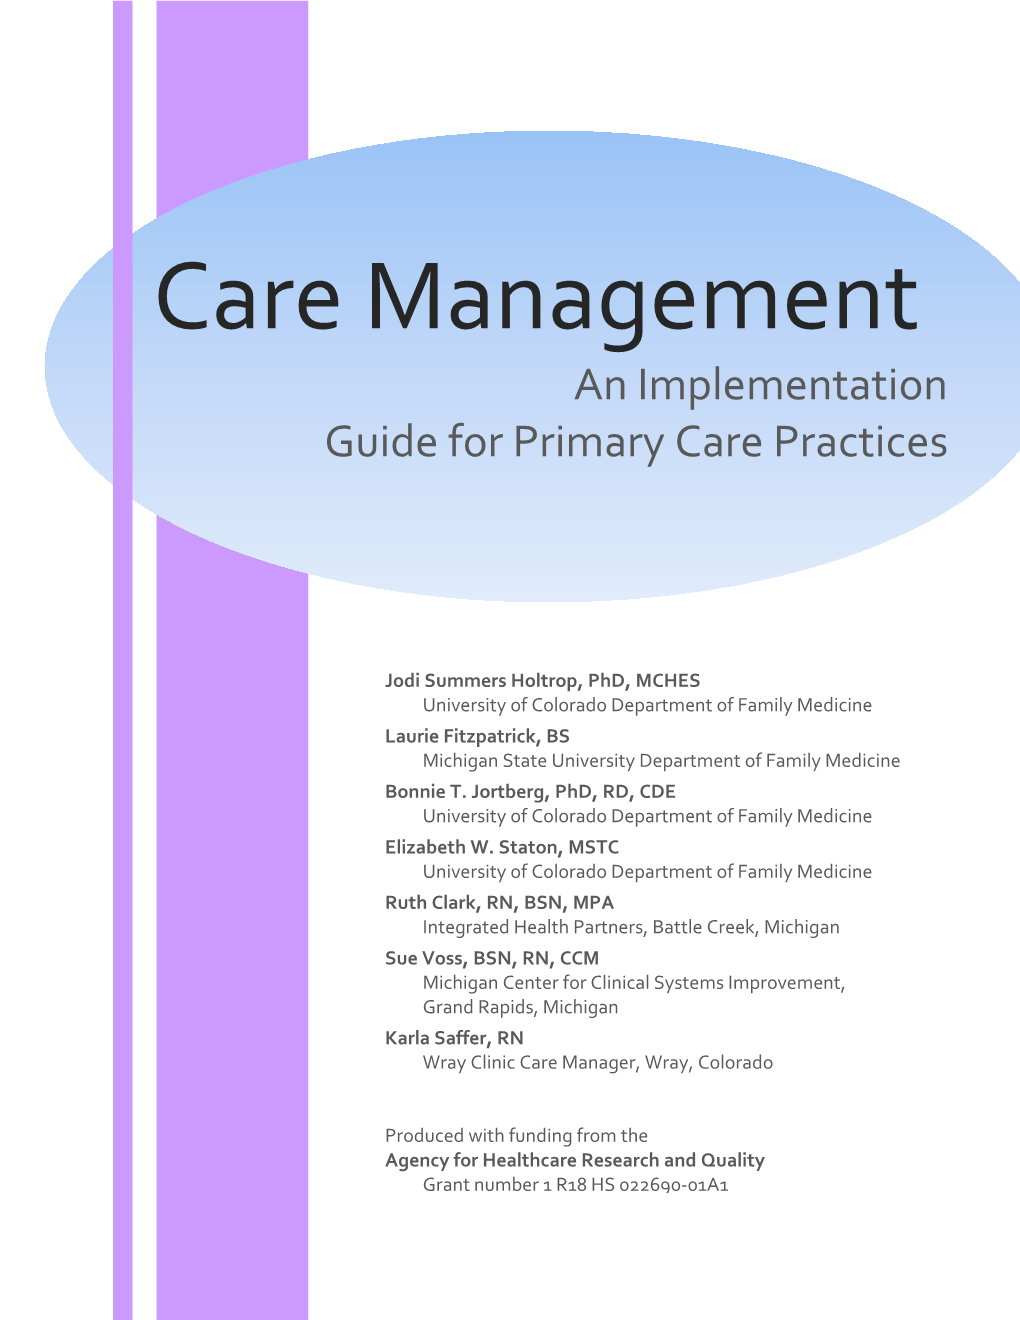 Care Management: an Implementation Guide for Primary